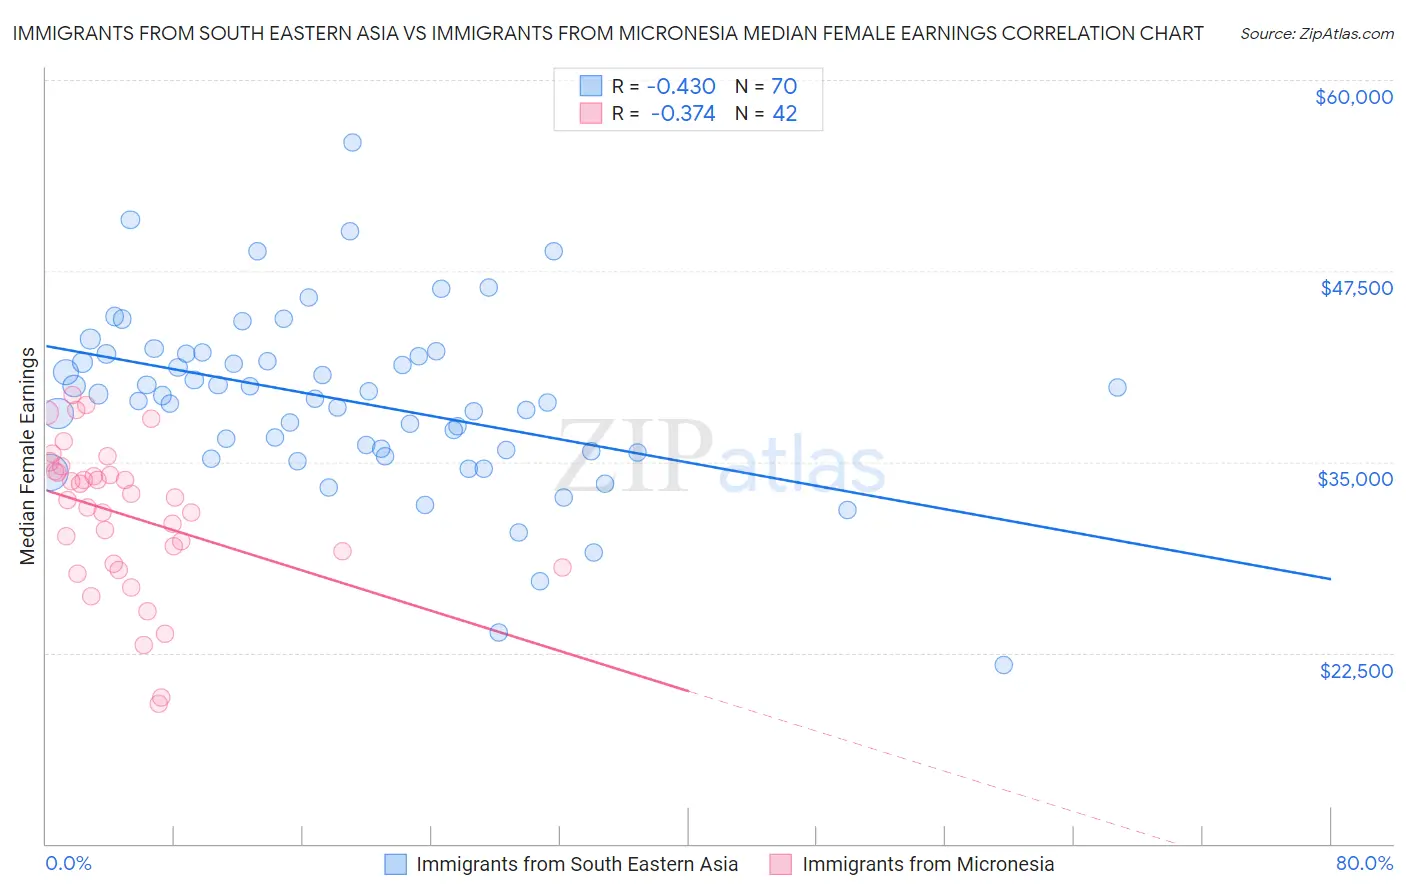 Immigrants from South Eastern Asia vs Immigrants from Micronesia Median Female Earnings